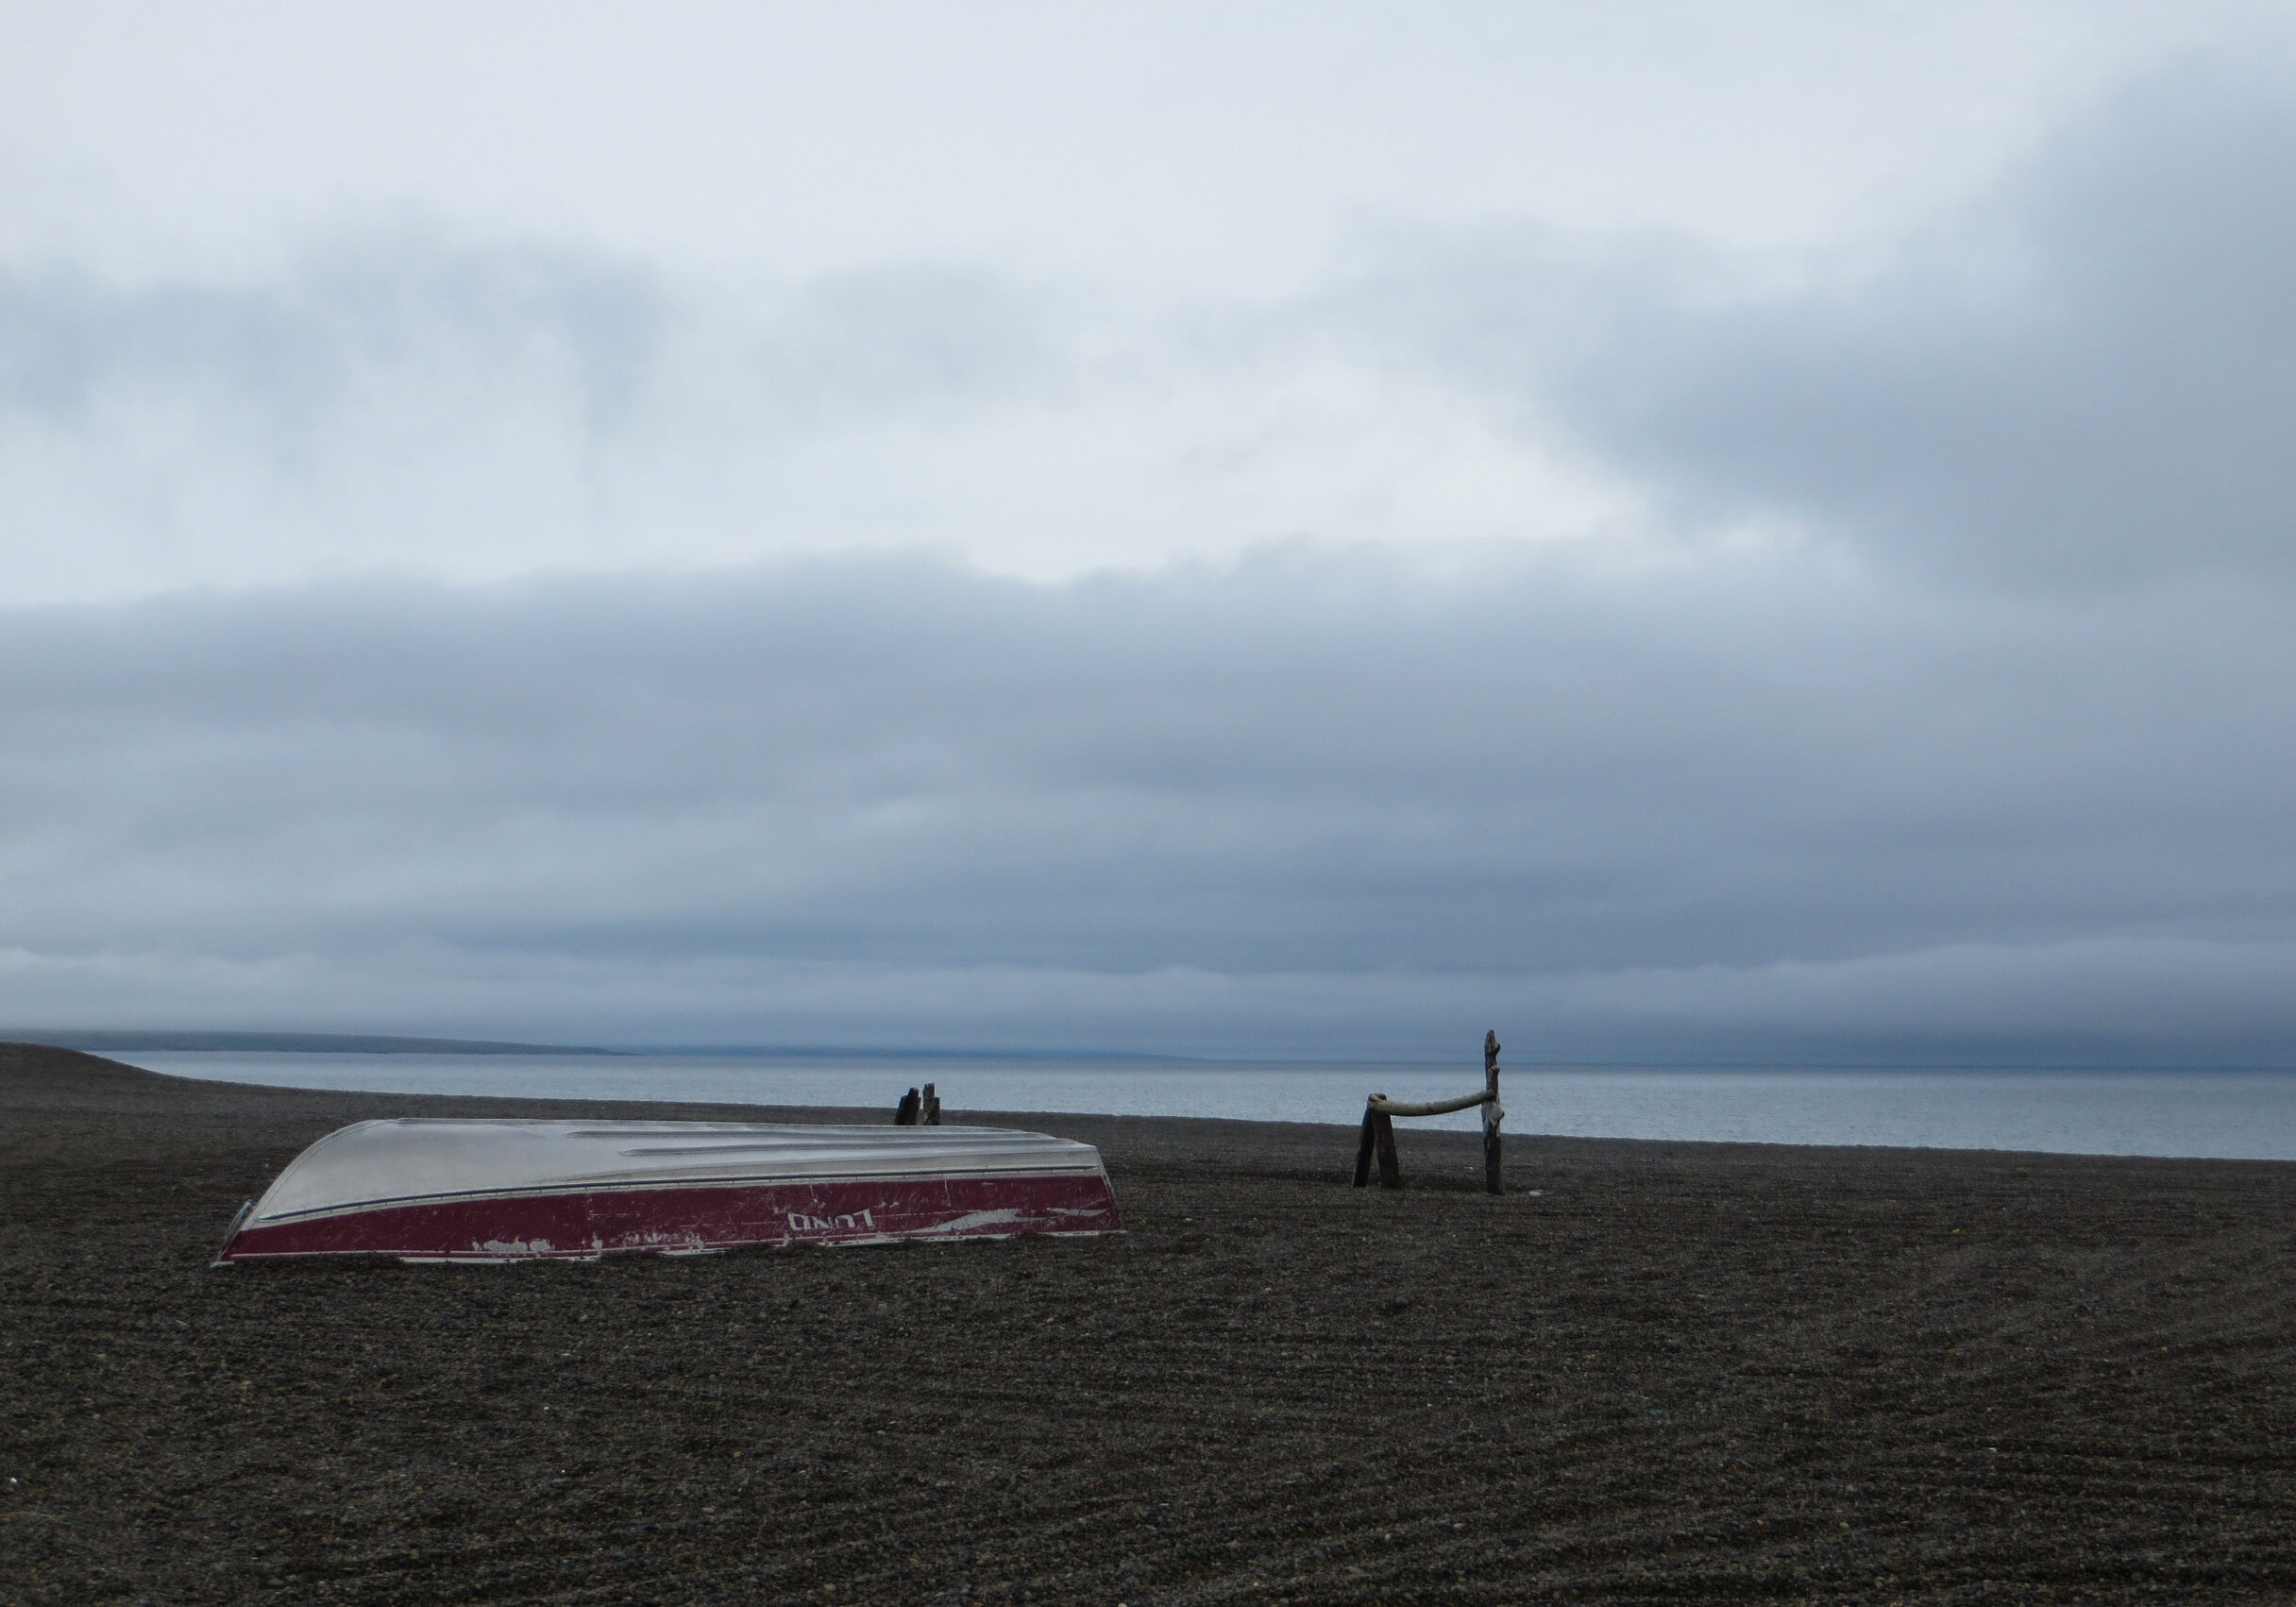 A boat resting on the beach on a cloudy summer day in Gambell, Alaska.